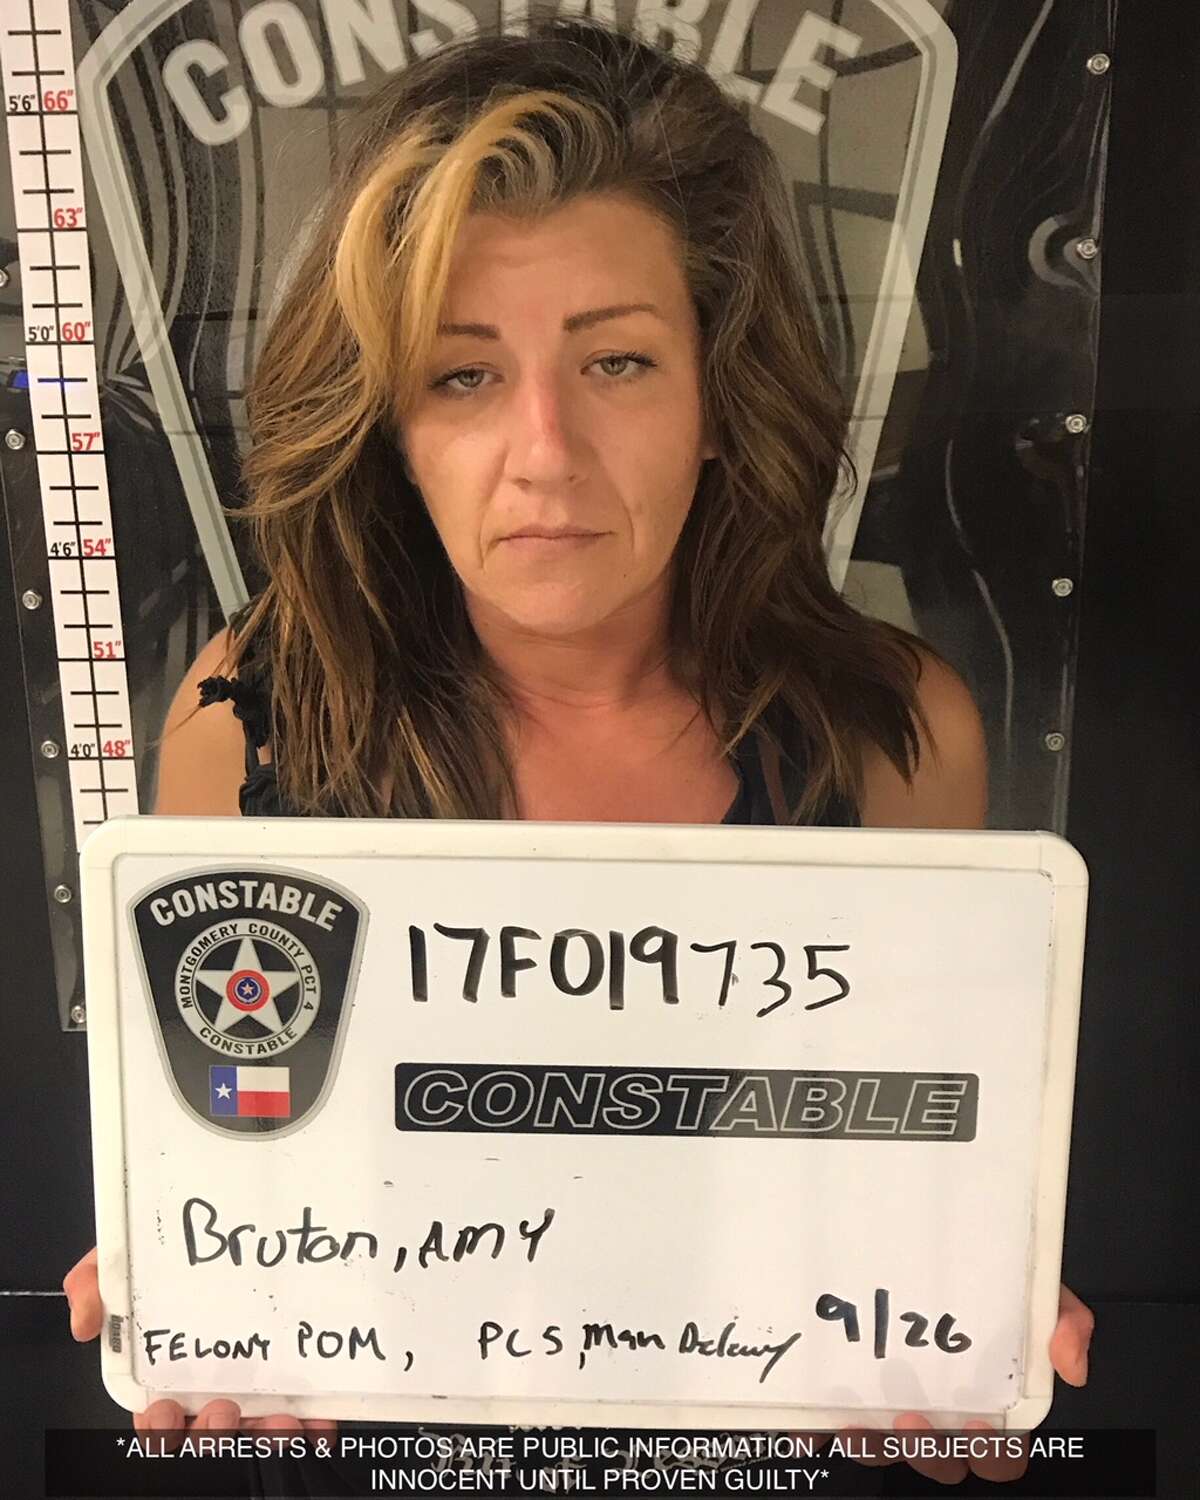 New CaneyAmy Bruton, 36, is charged with charged with manufacture/delivery of a controlled substance and possession of marijuana in Montgomery County after she was arrested on Sept. 26, 2017.